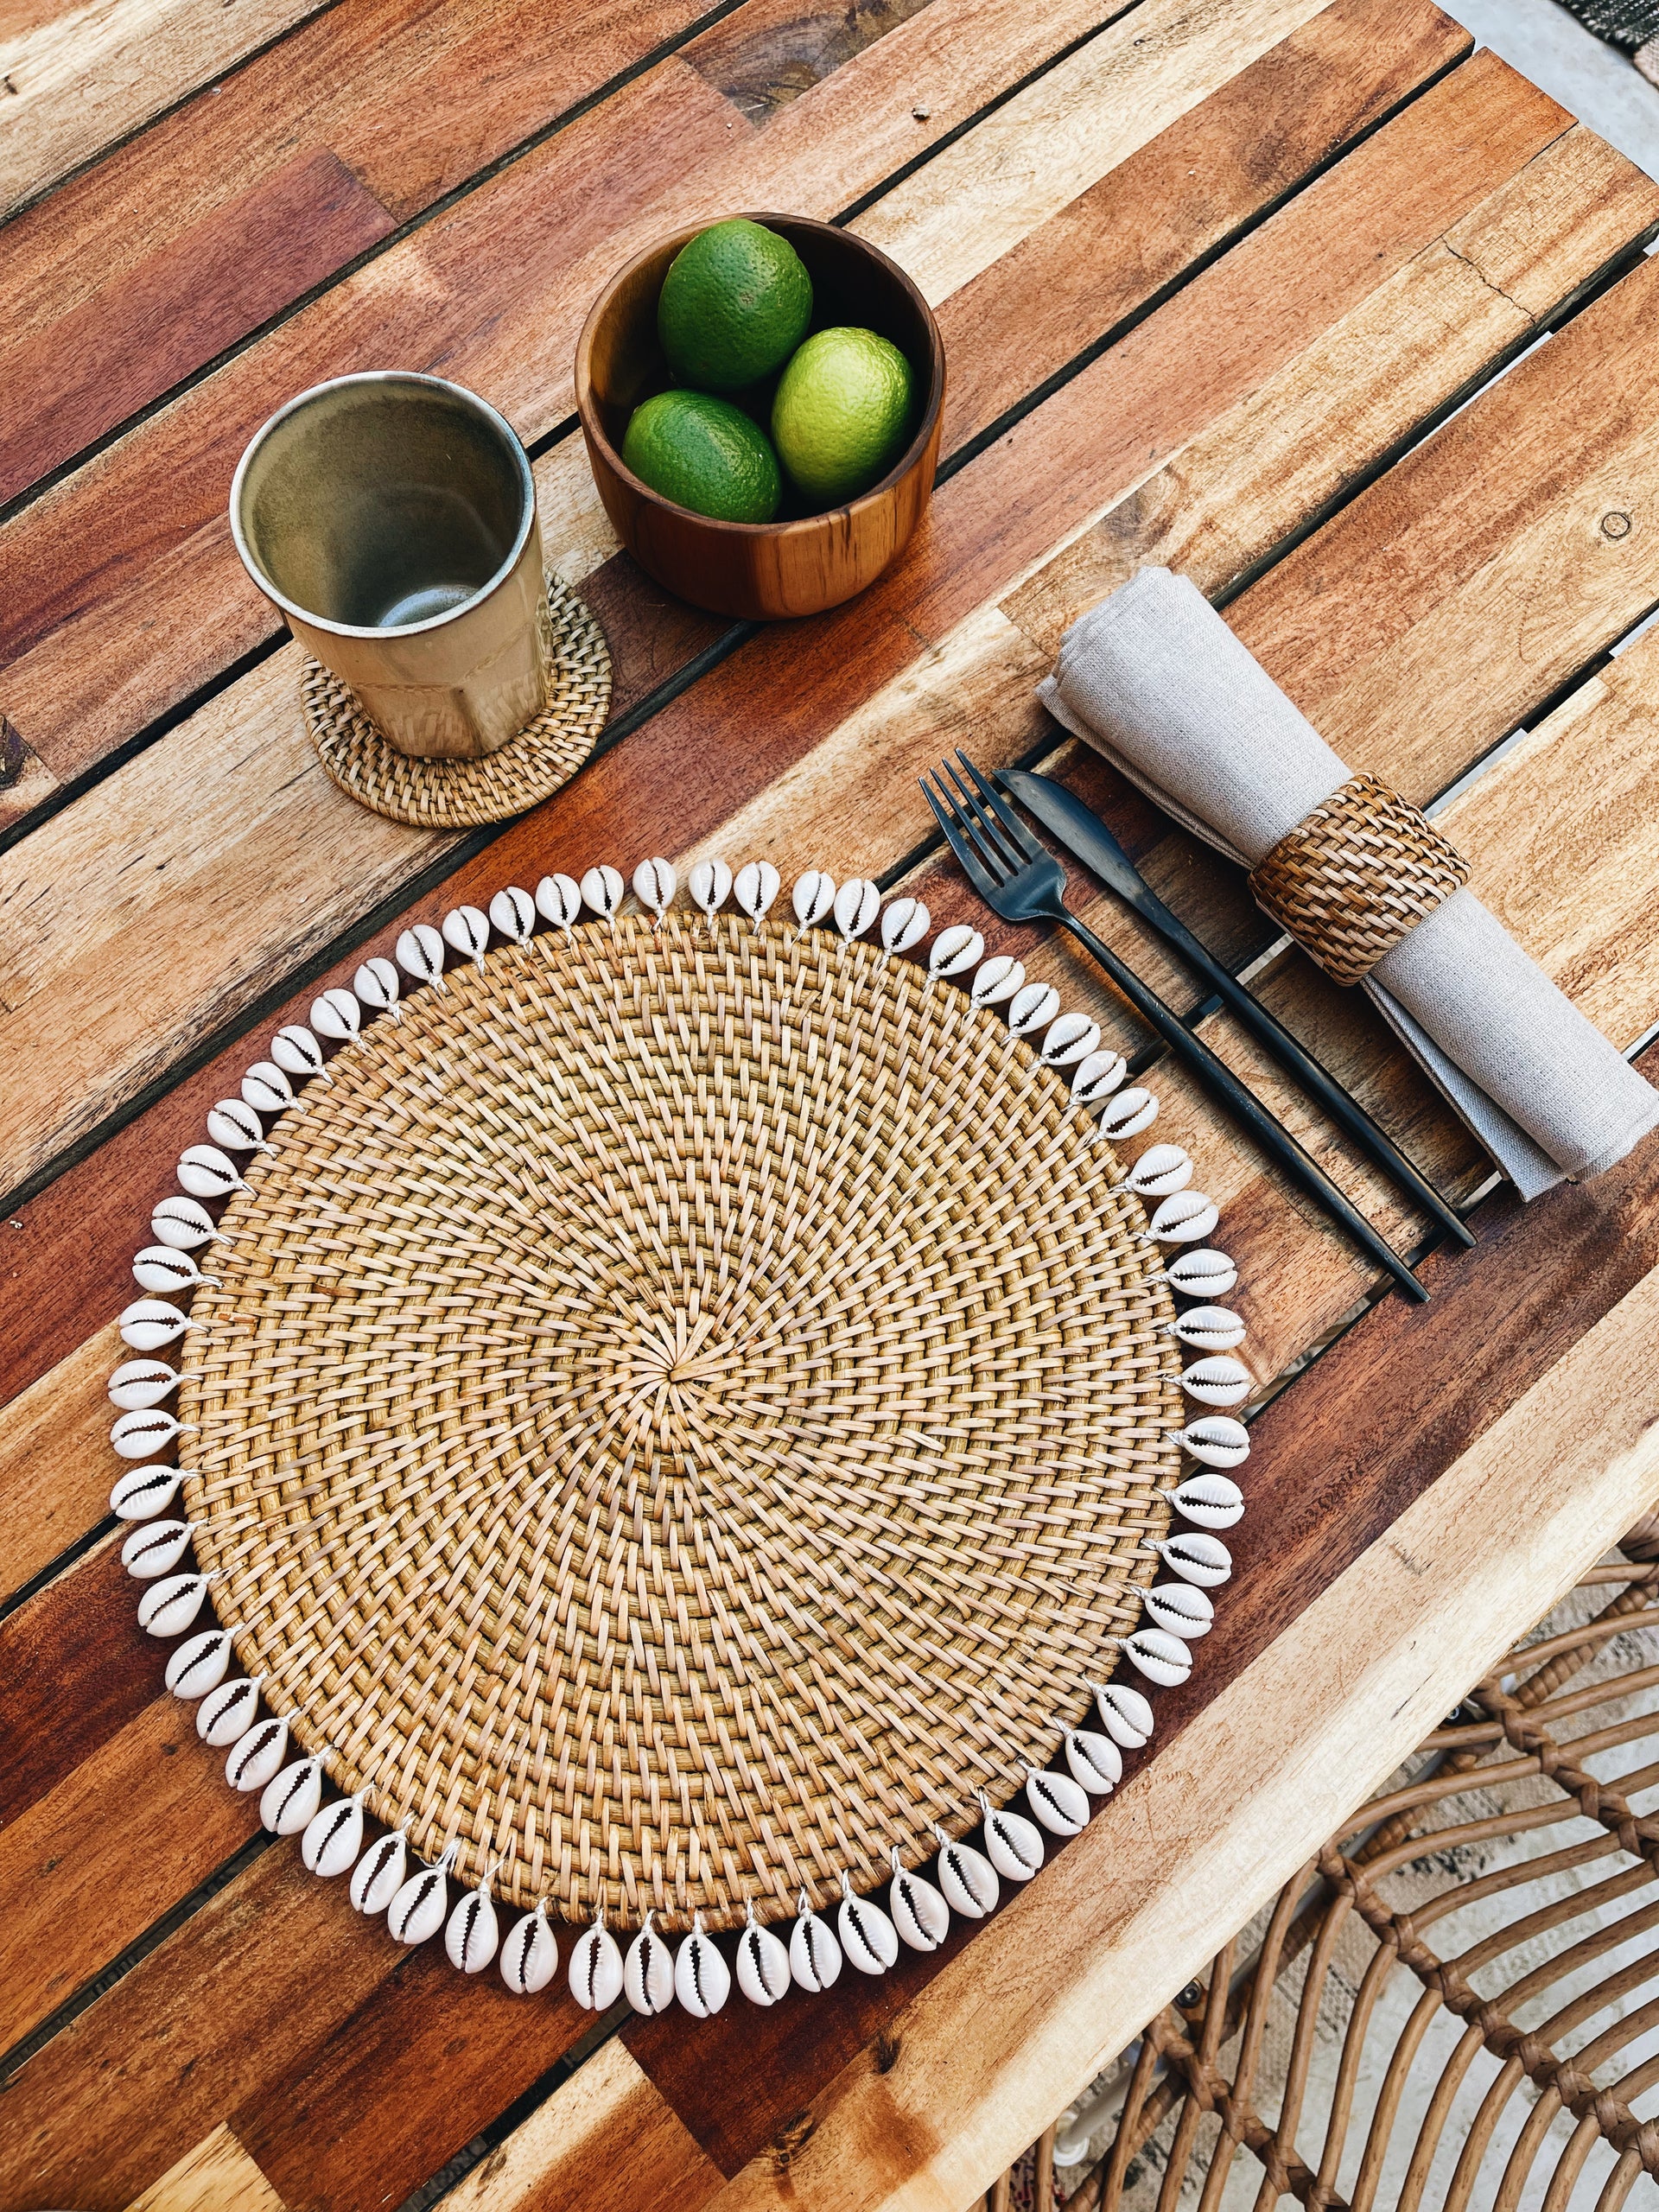 set up your dining table: coaster, bowl, placemat, napkin holder all made by natural materials